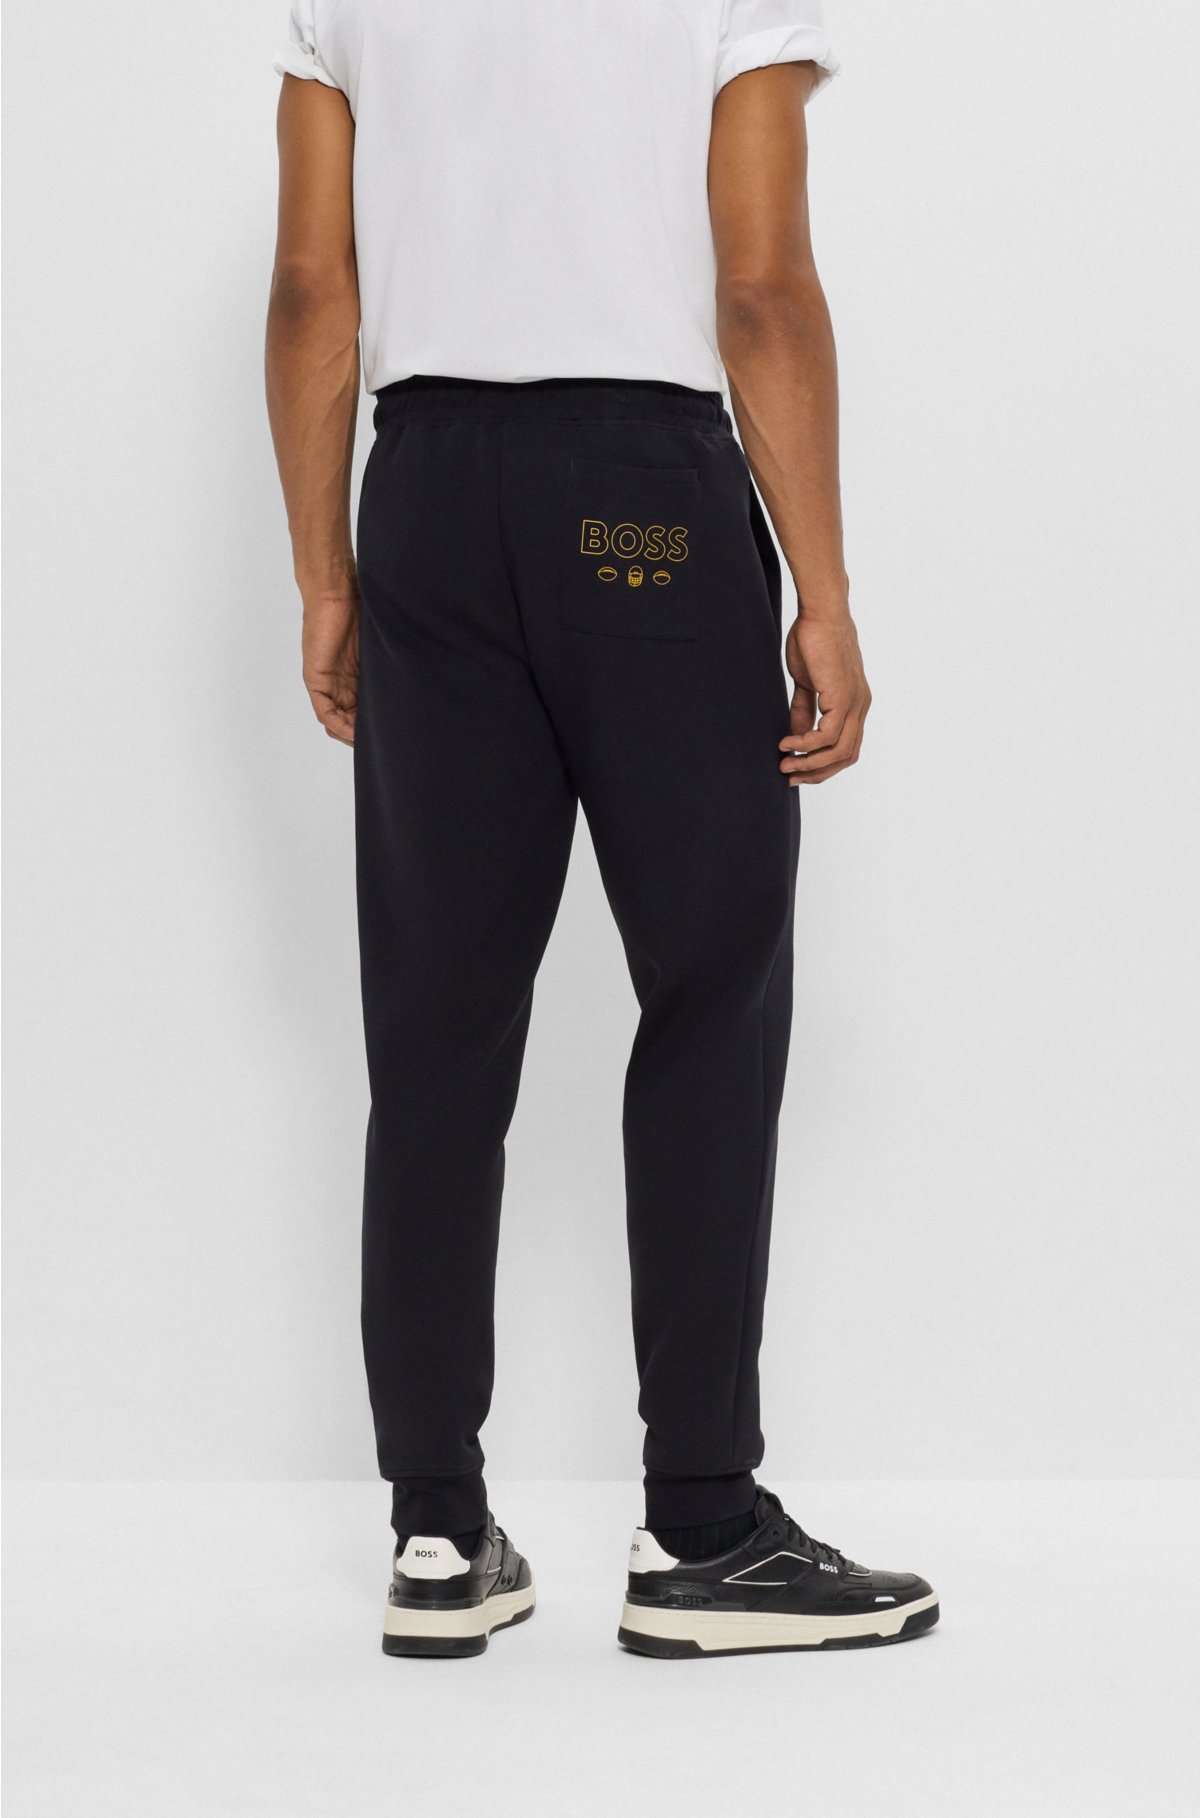 BOSS x NFL cotton-blend tracksuit bottoms with collaborative branding, Commanders